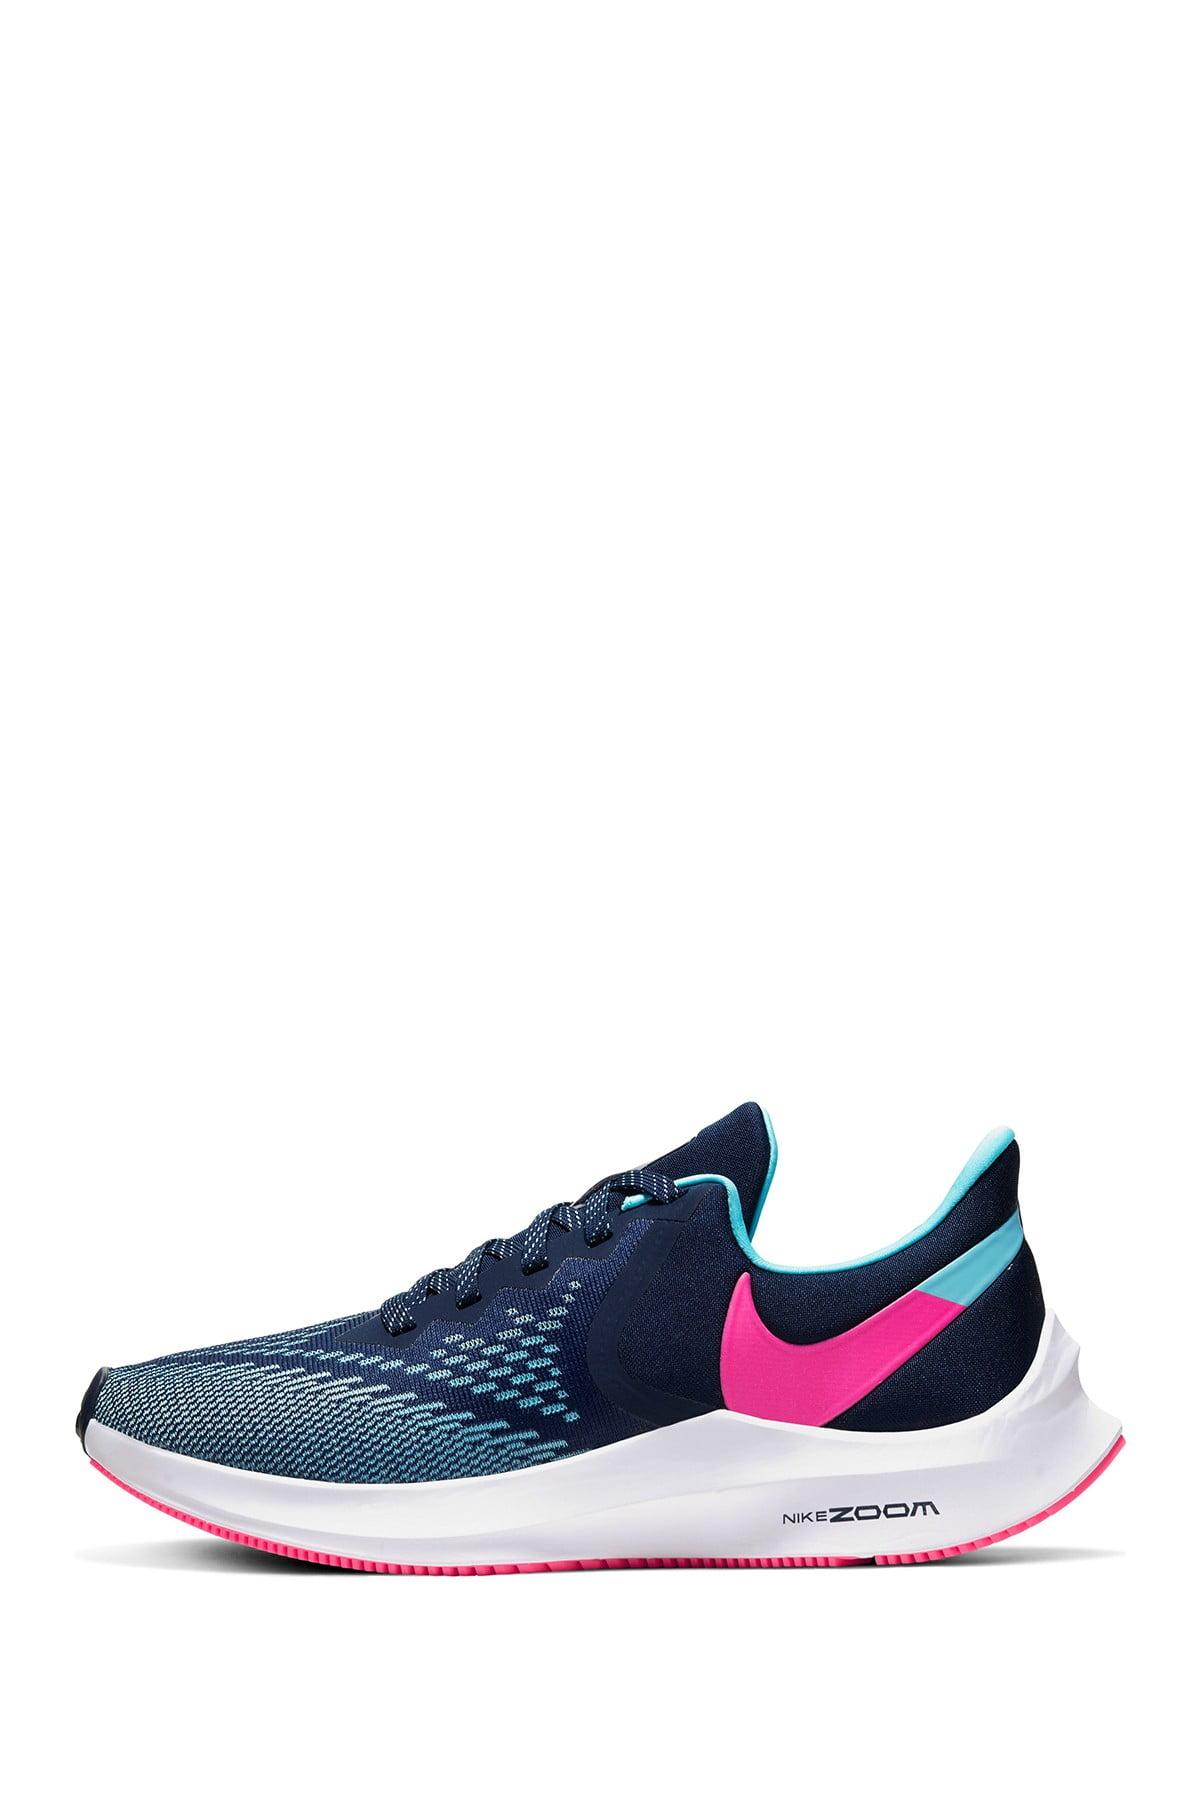 Nike Zoom Winflo 6 Running Shoes in Navy/Pink/Teal (Blue) | Lyst